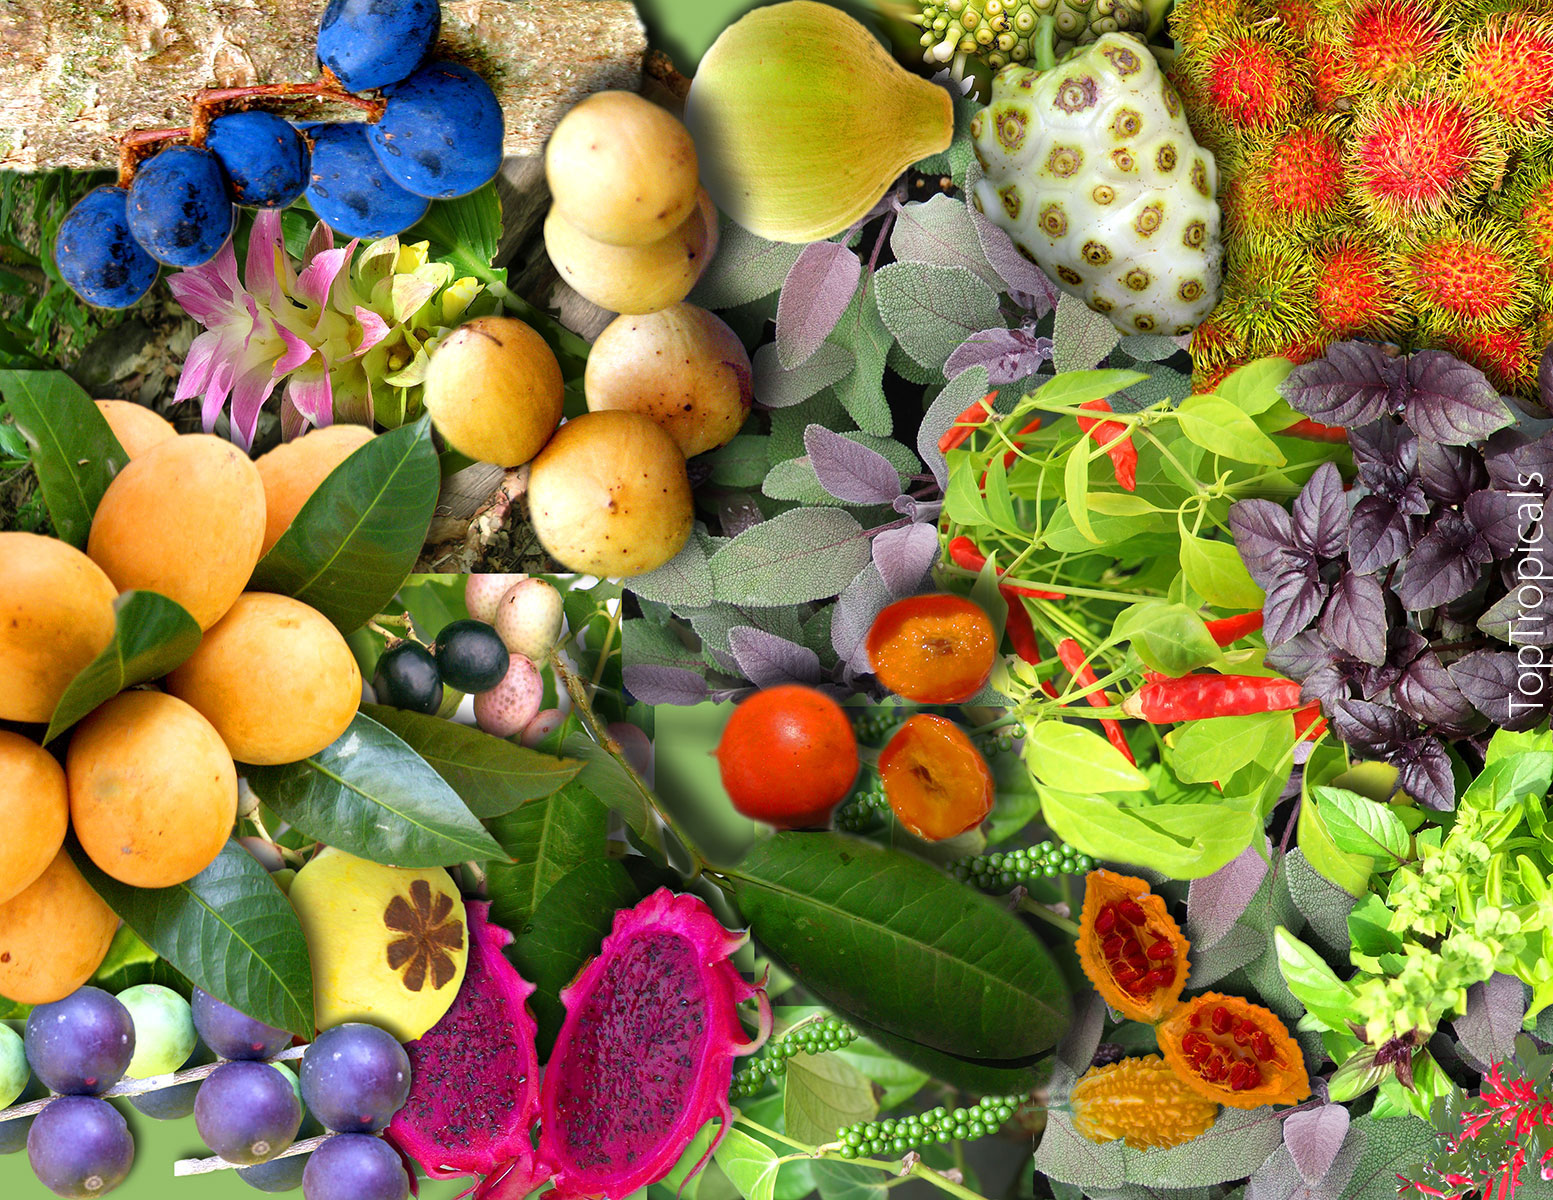 Tropical Food Forest collage